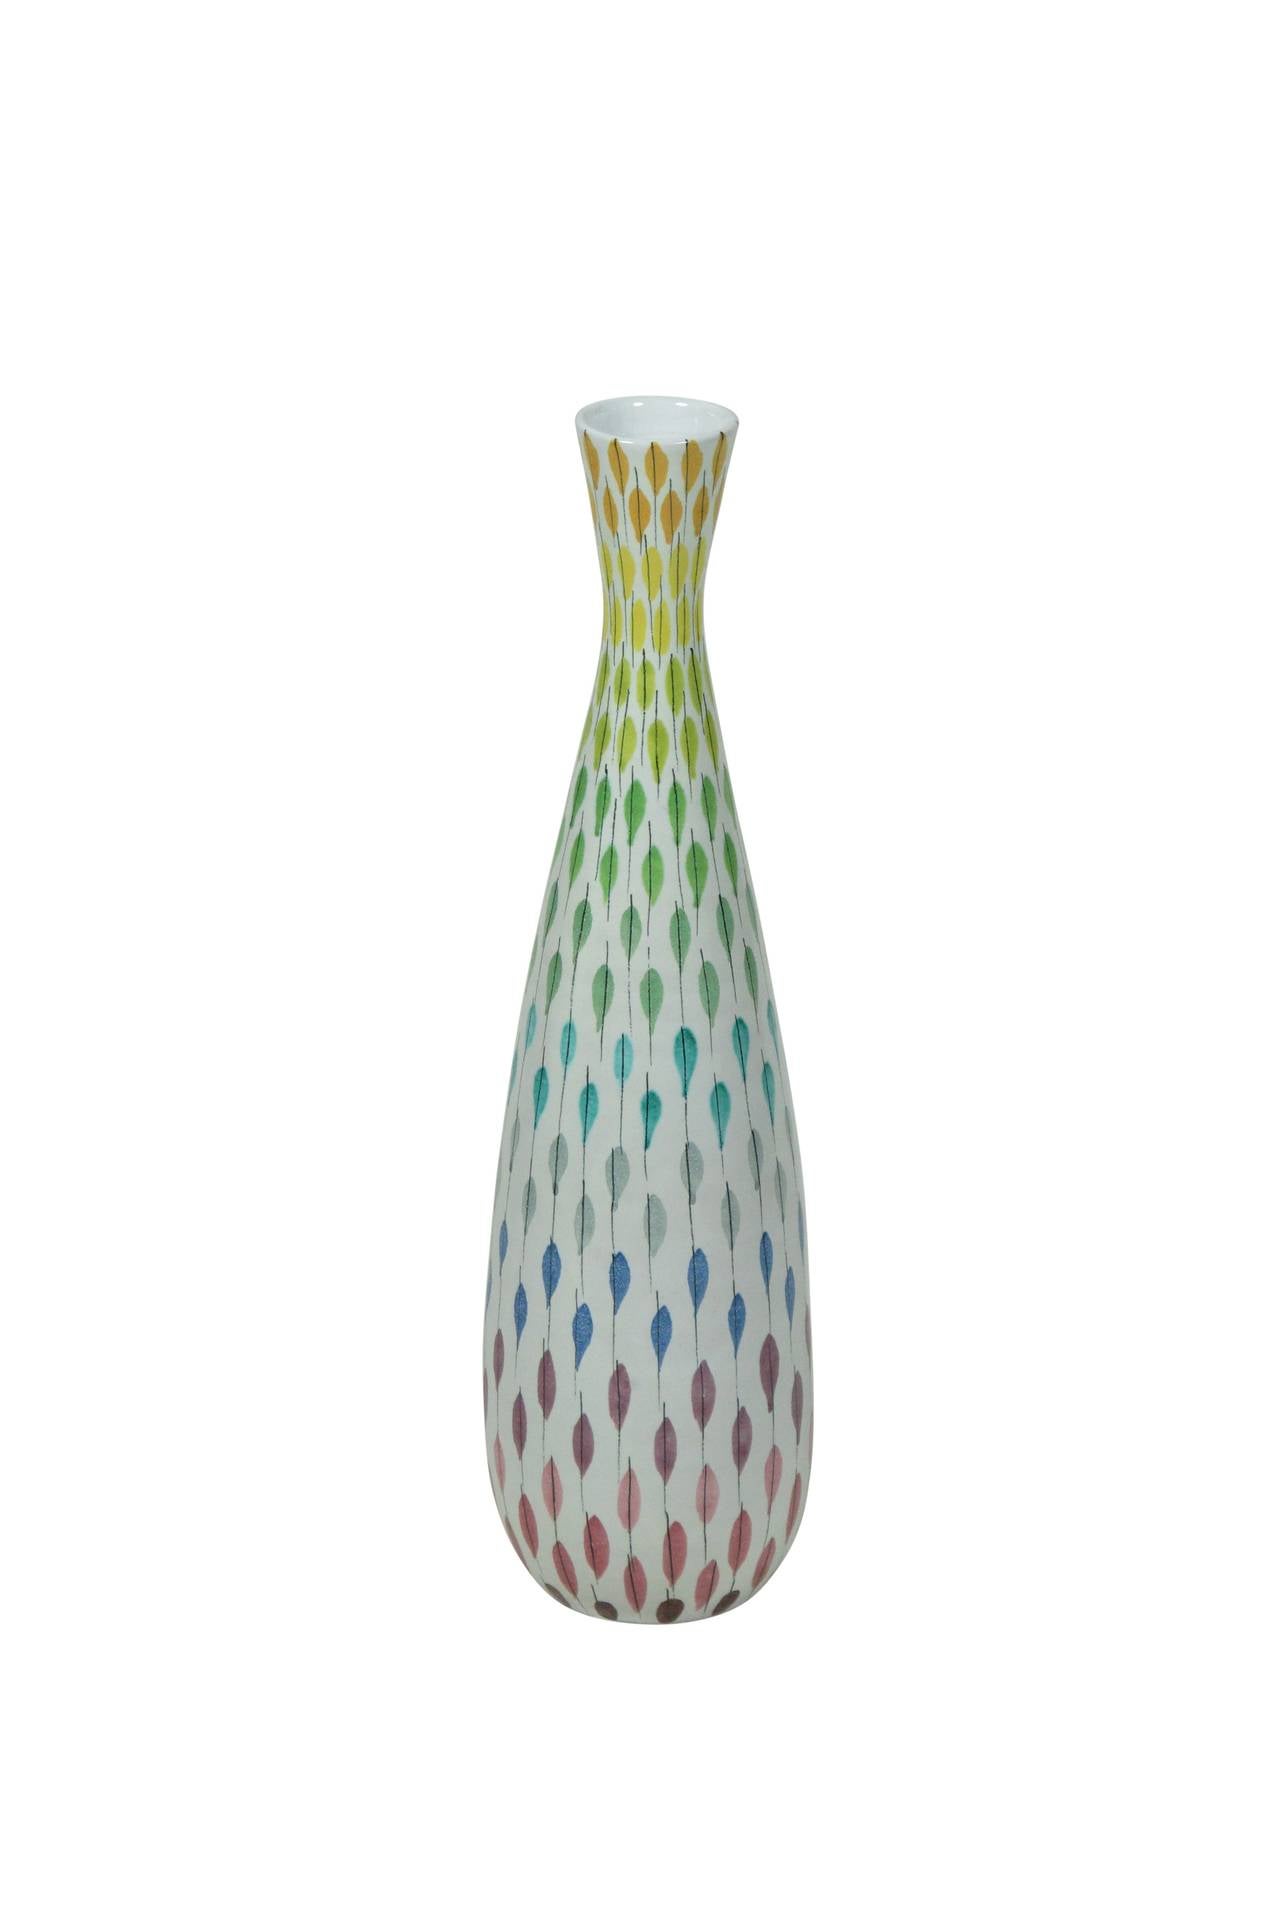 Hard to find multicolored Piuma (feather) pattern Bitossi vase imported to the United States by Raymor. Retains original Raymor paper label.